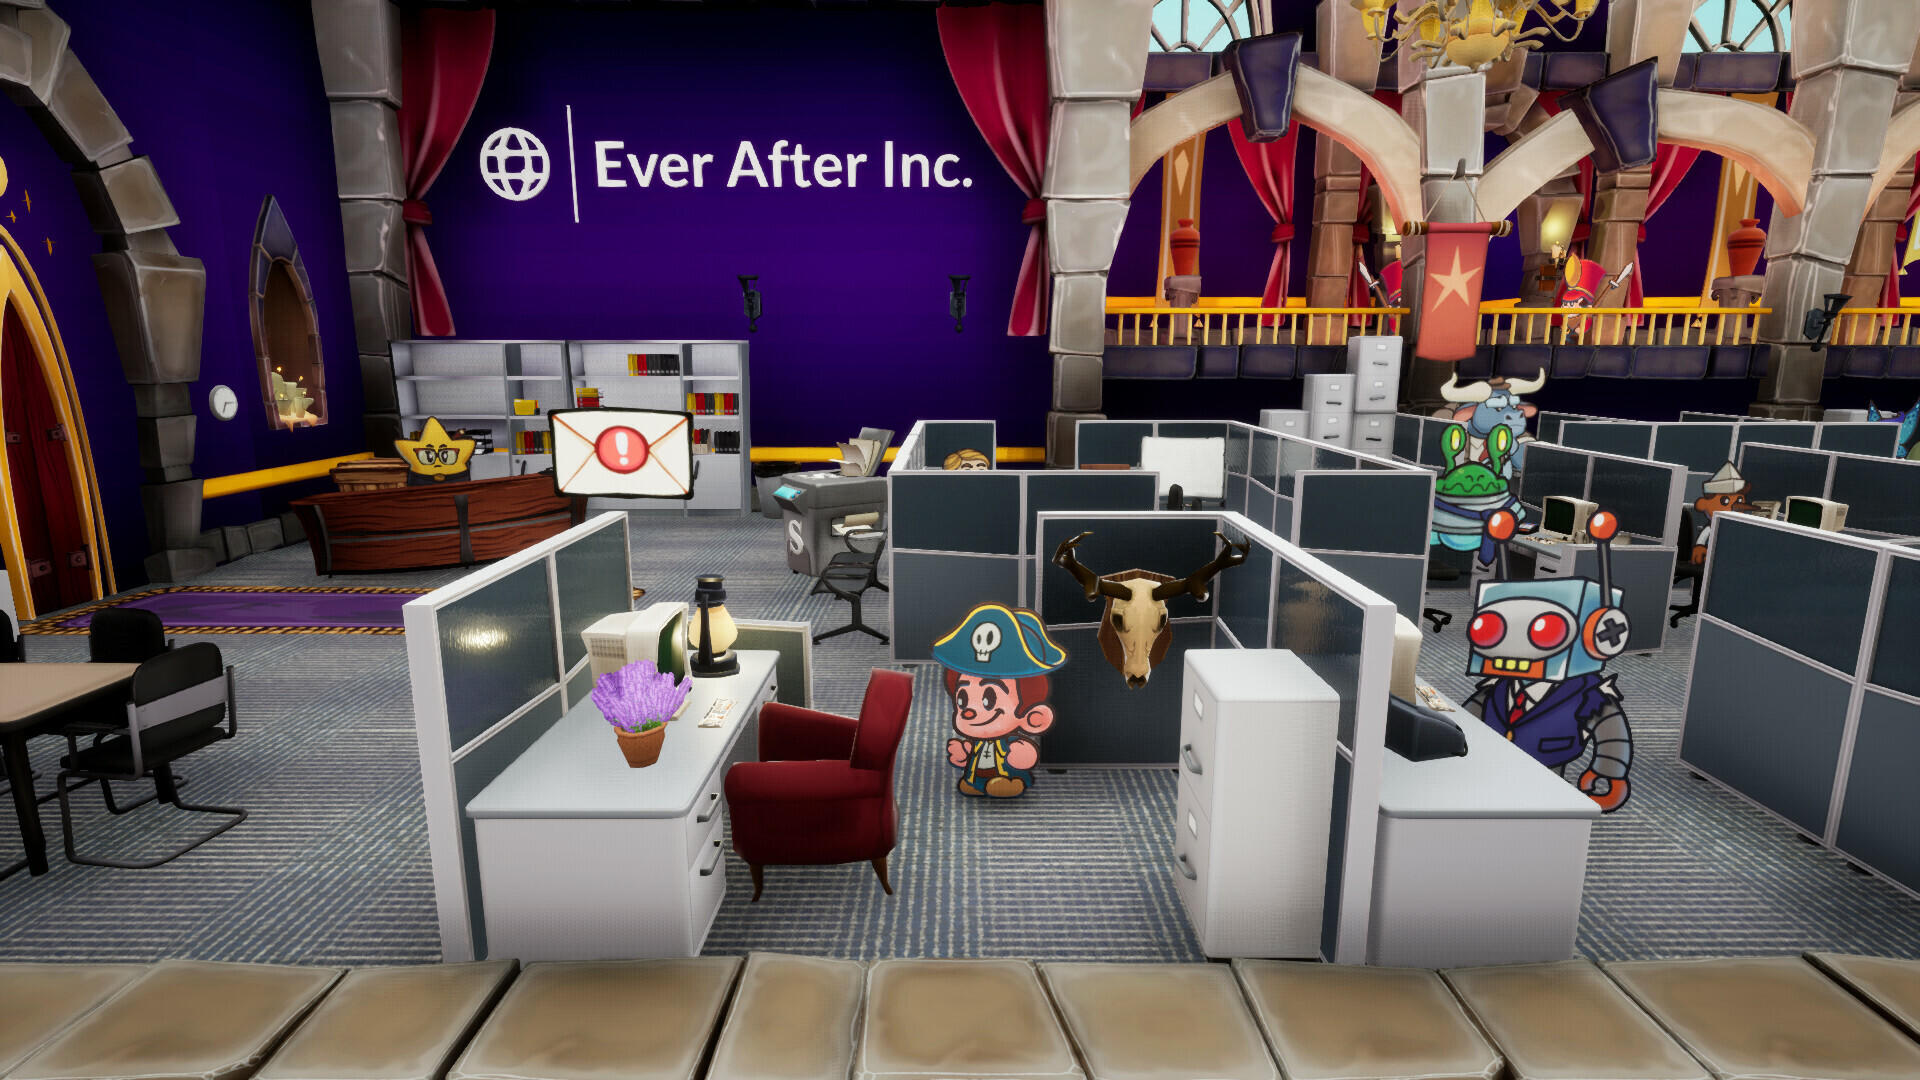 Screenshot of Escape from Ever After: Onboarding